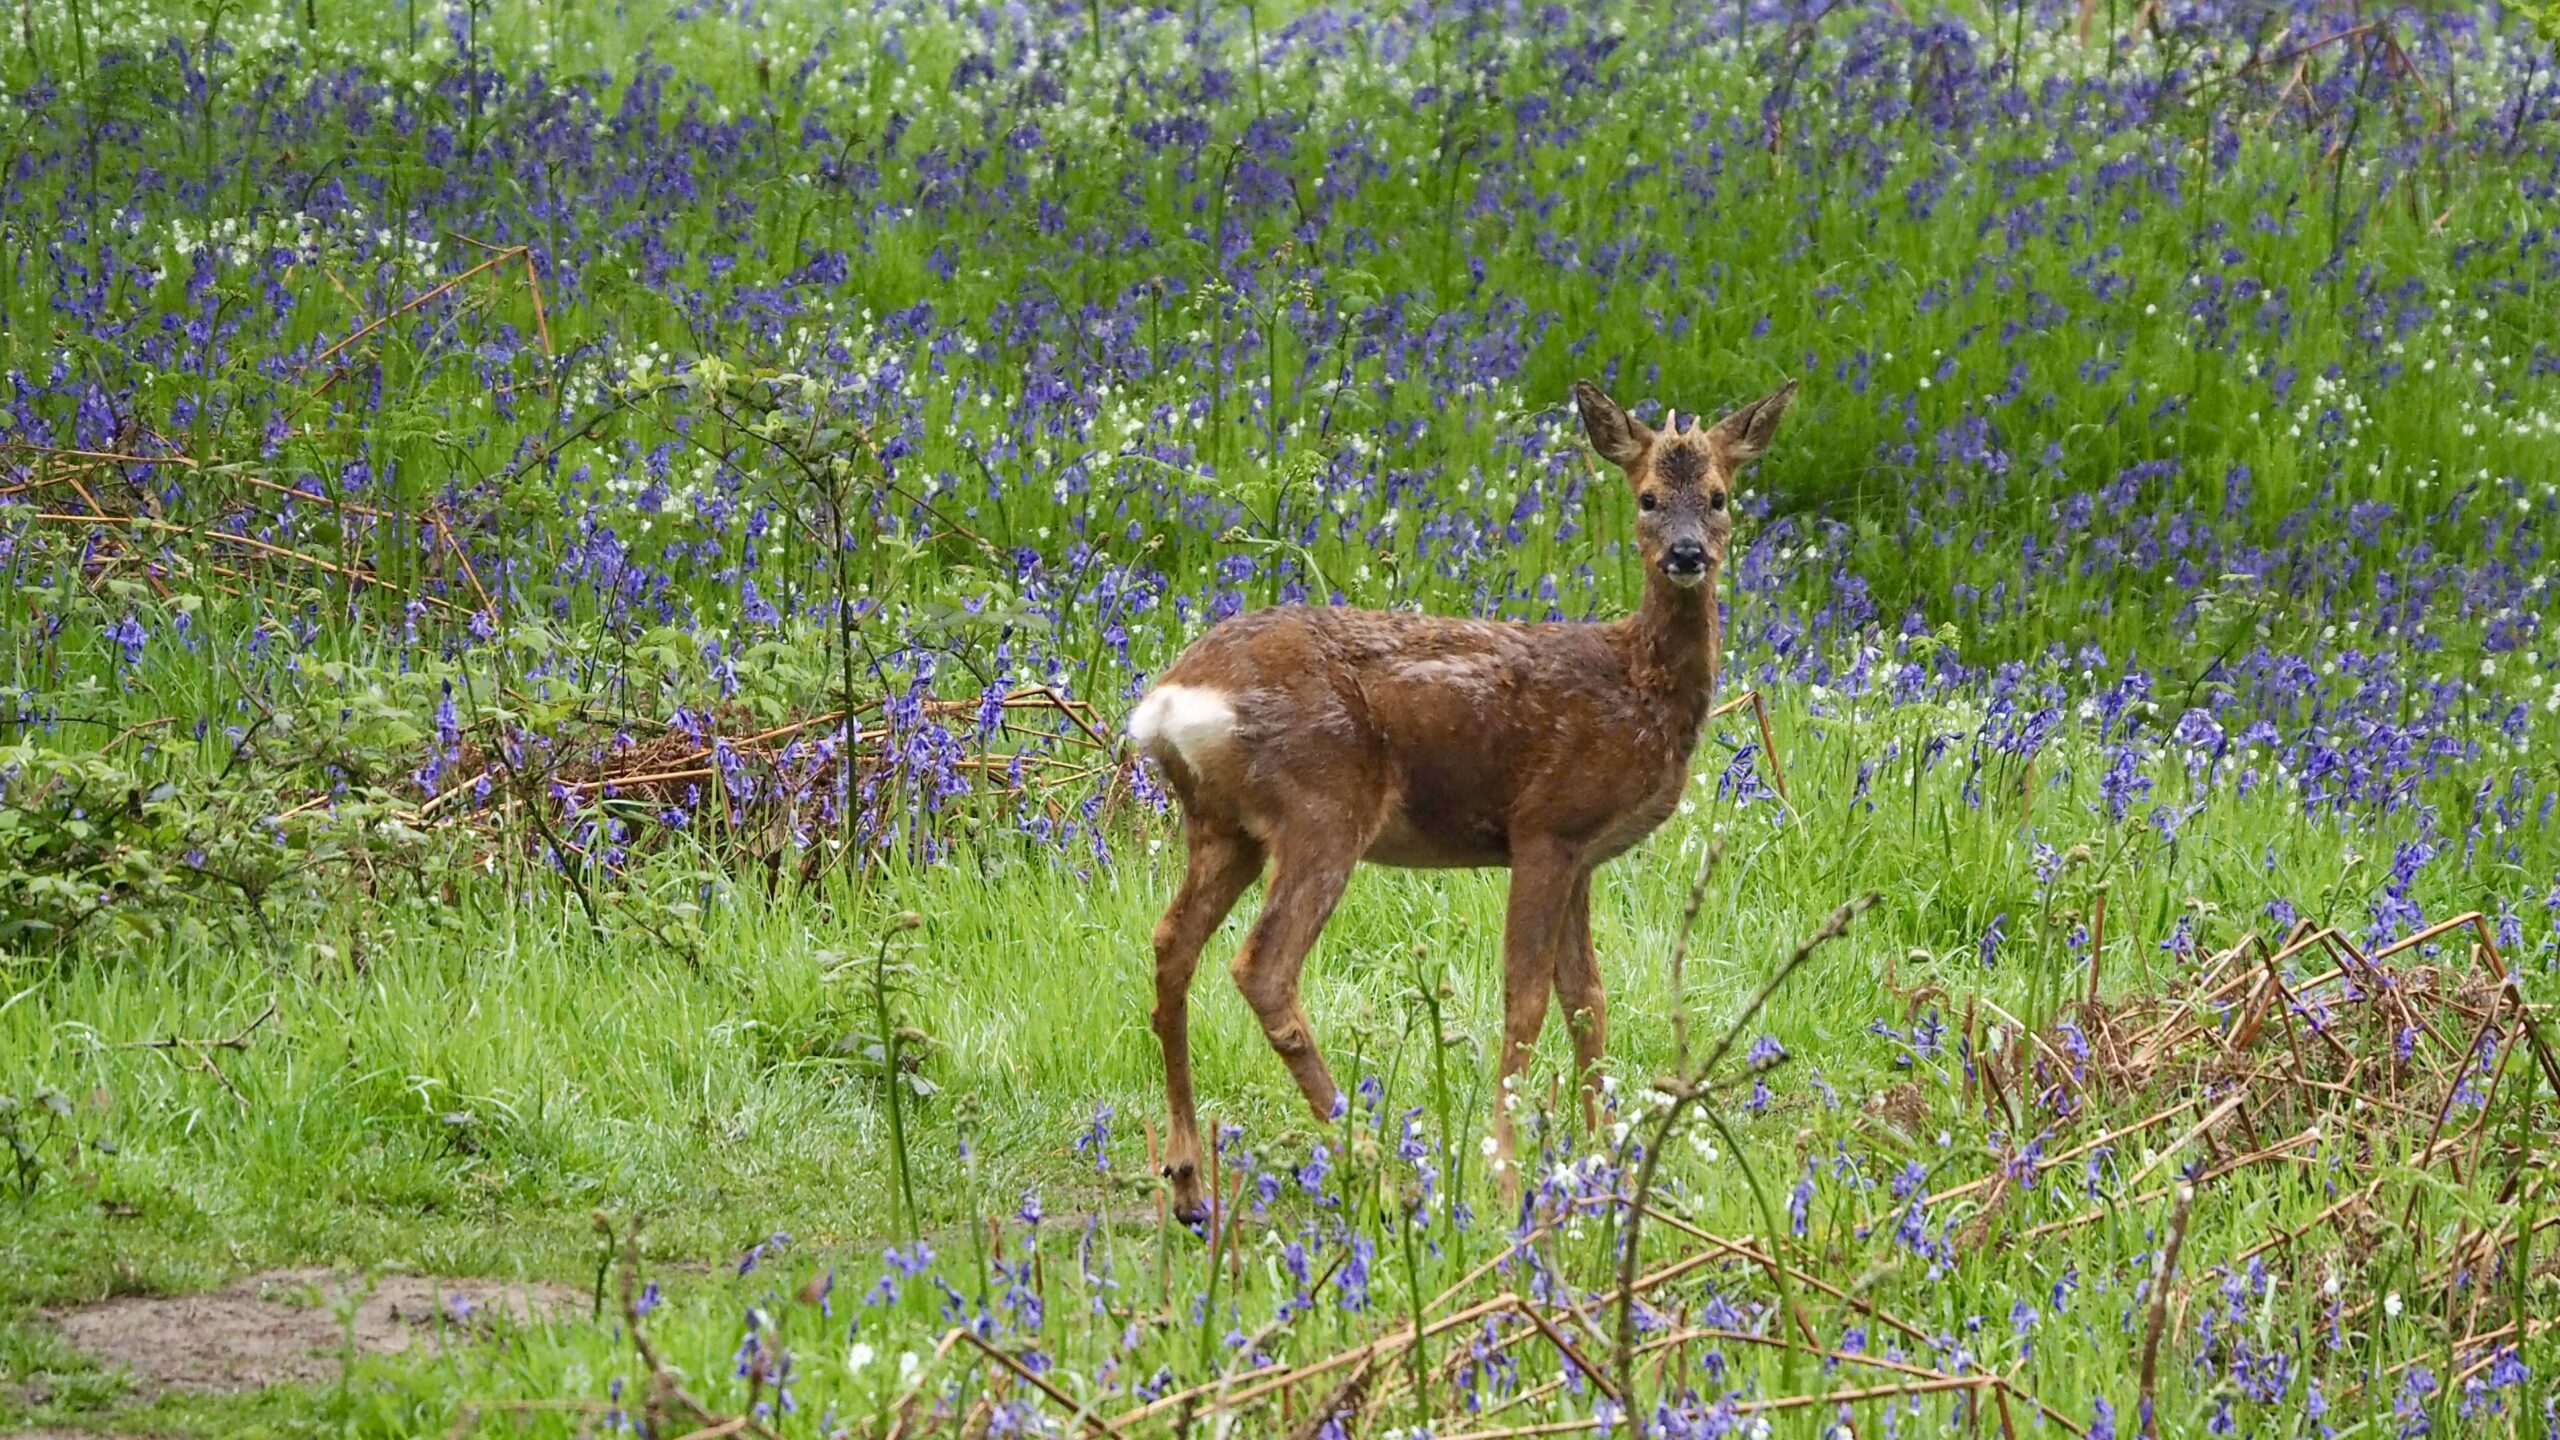 The Silent Standoff — An Unexpected Thrill of a Roe Deer Encounter